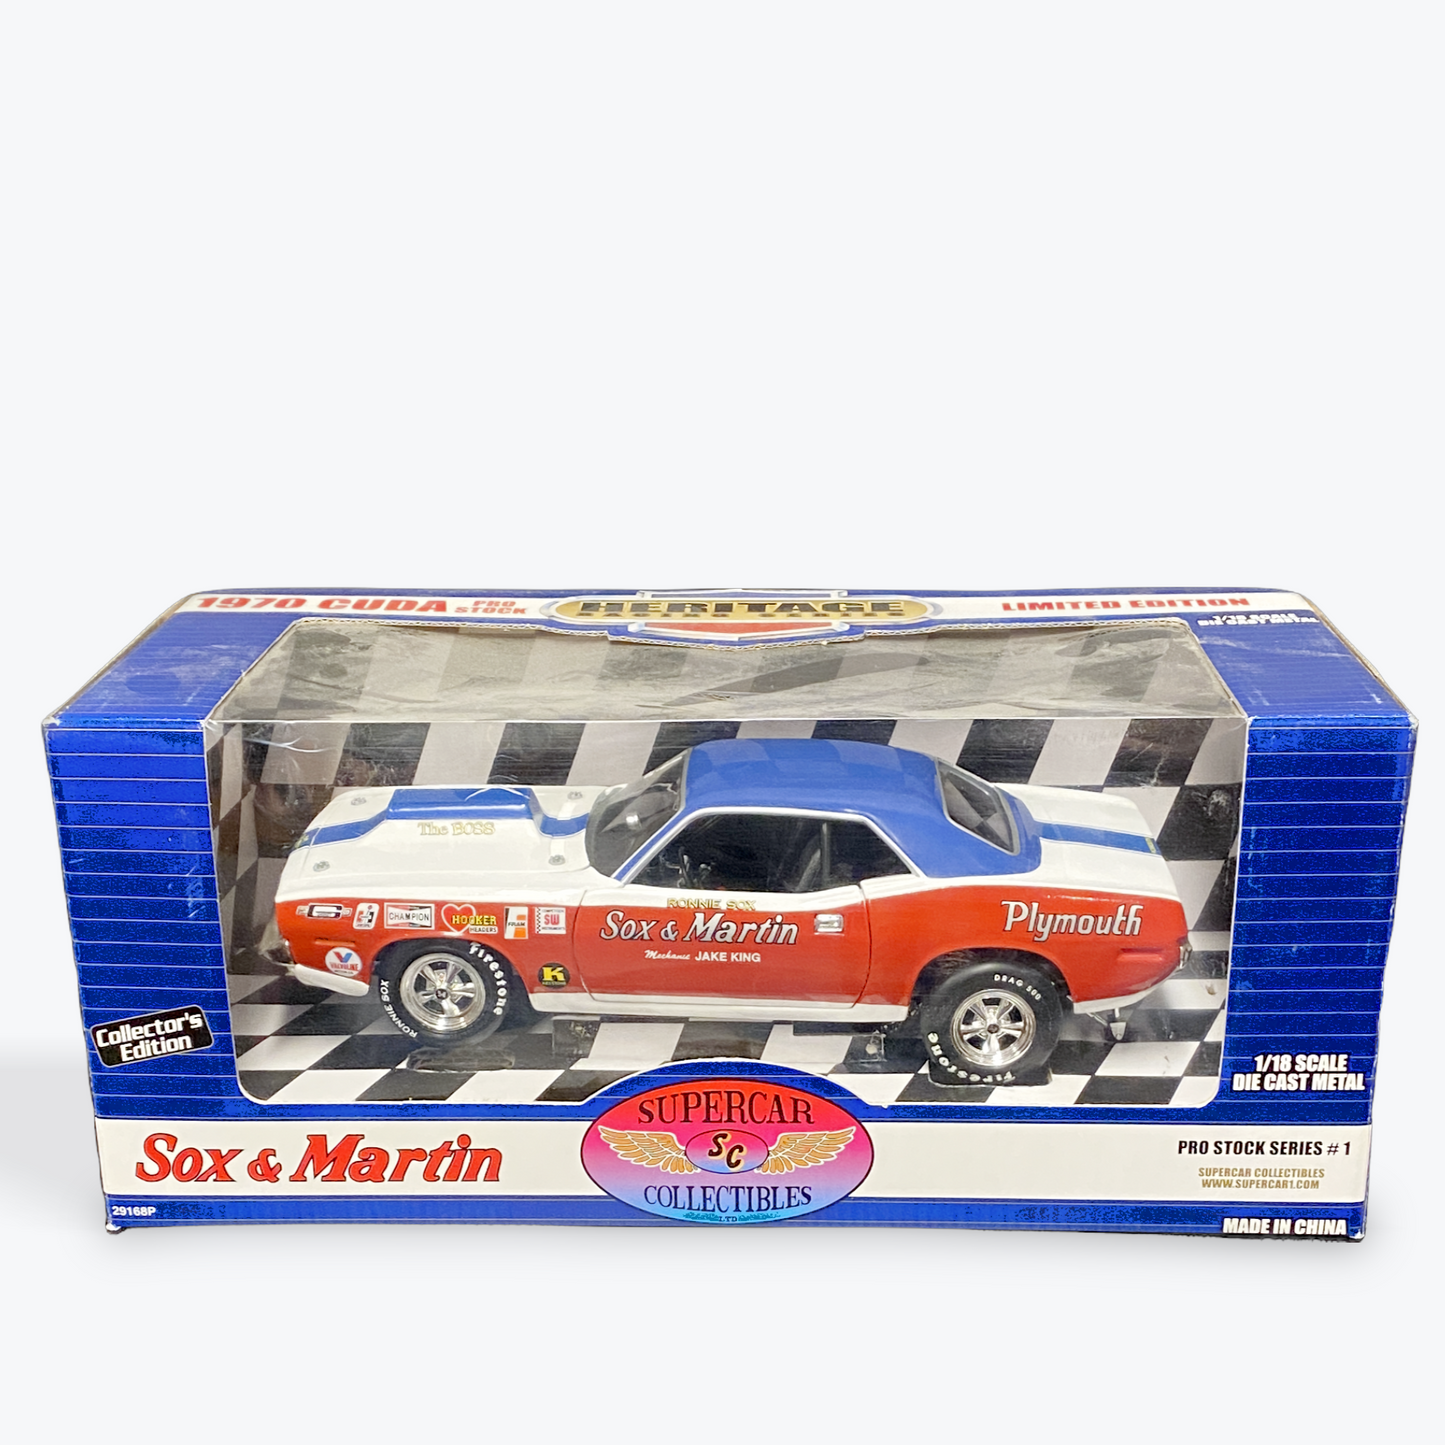 [ULTRA RARE] [LIMITED EDITION] 1970 Plymouth Cuda Sox & Martin Pro Stock/Pro Stock Series - White/Red/Blue/Race Graphics - Ertl Collectibles